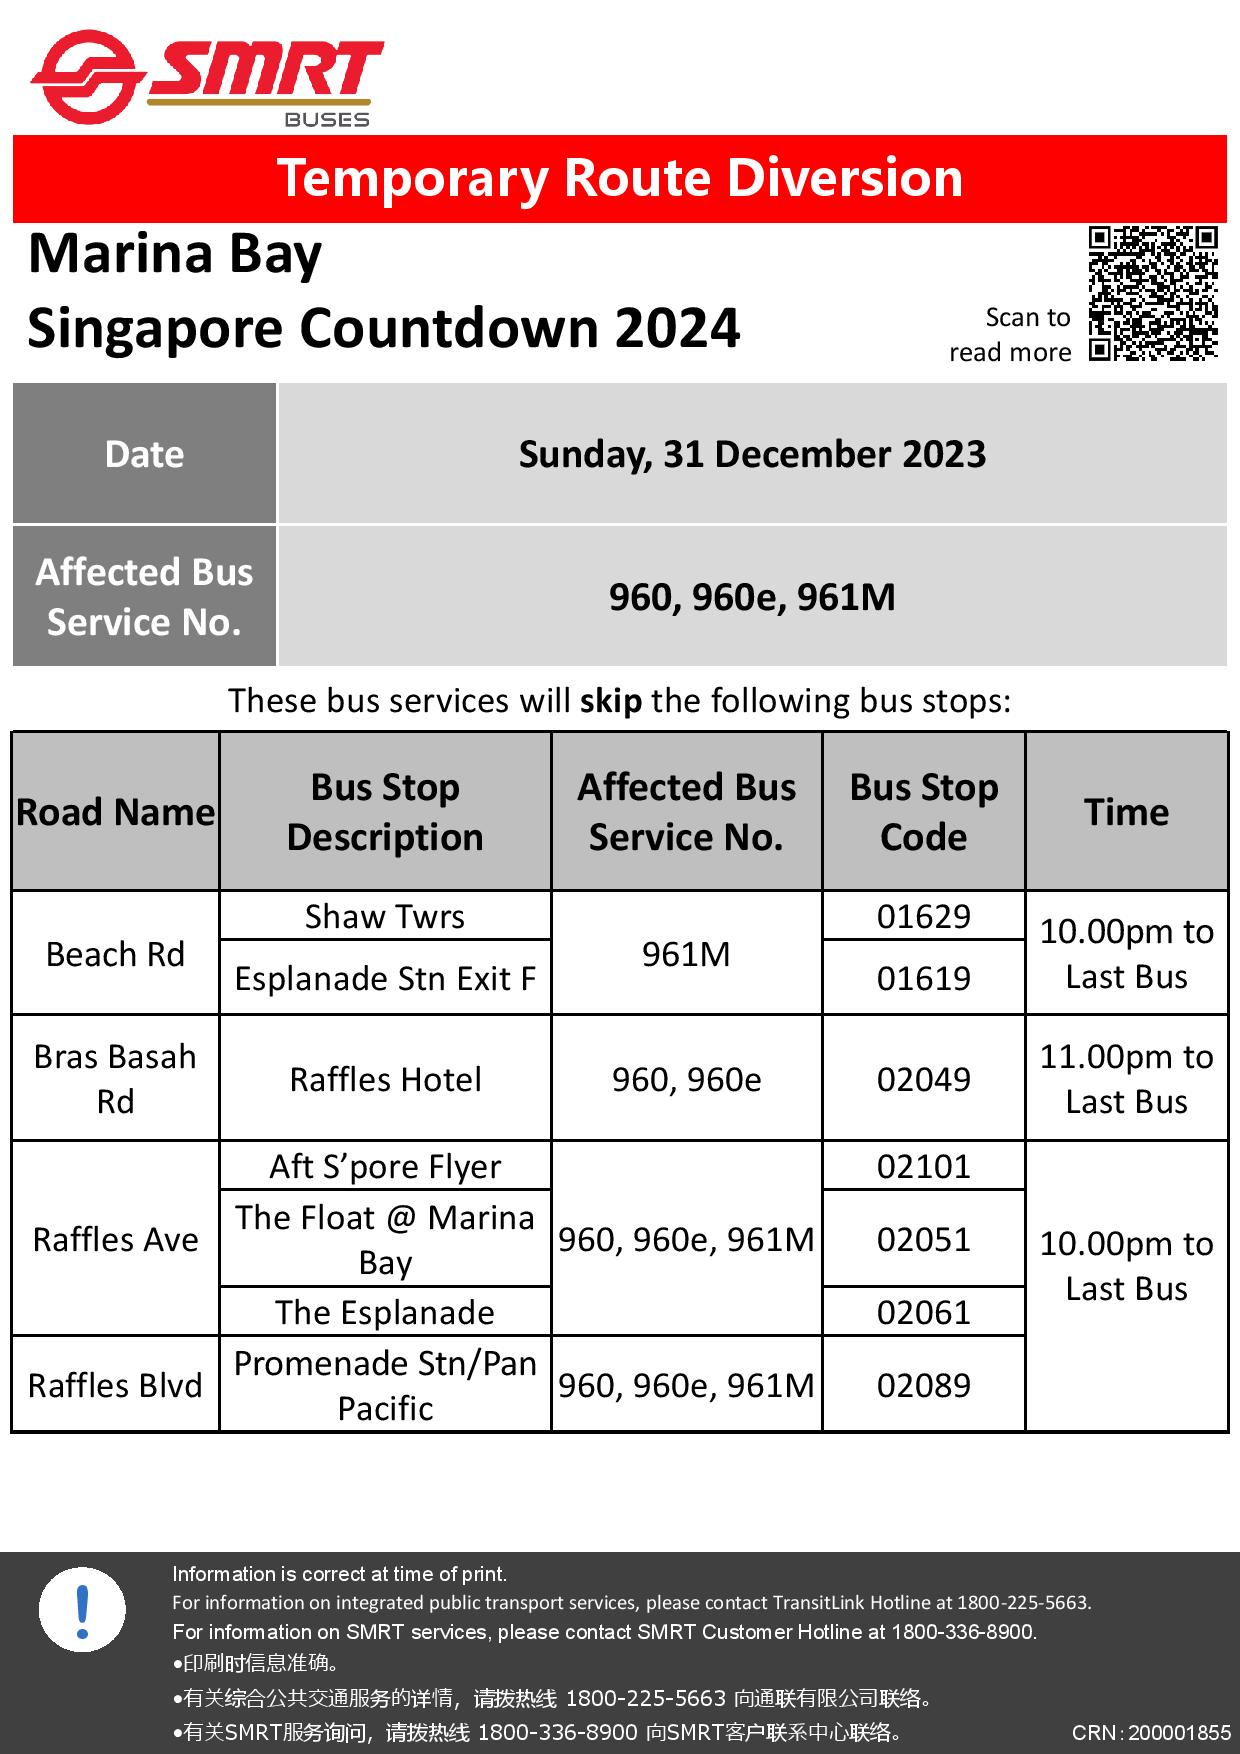 SMRT Buses Temporary Route Diversion Poster for Marina Bay Singapore